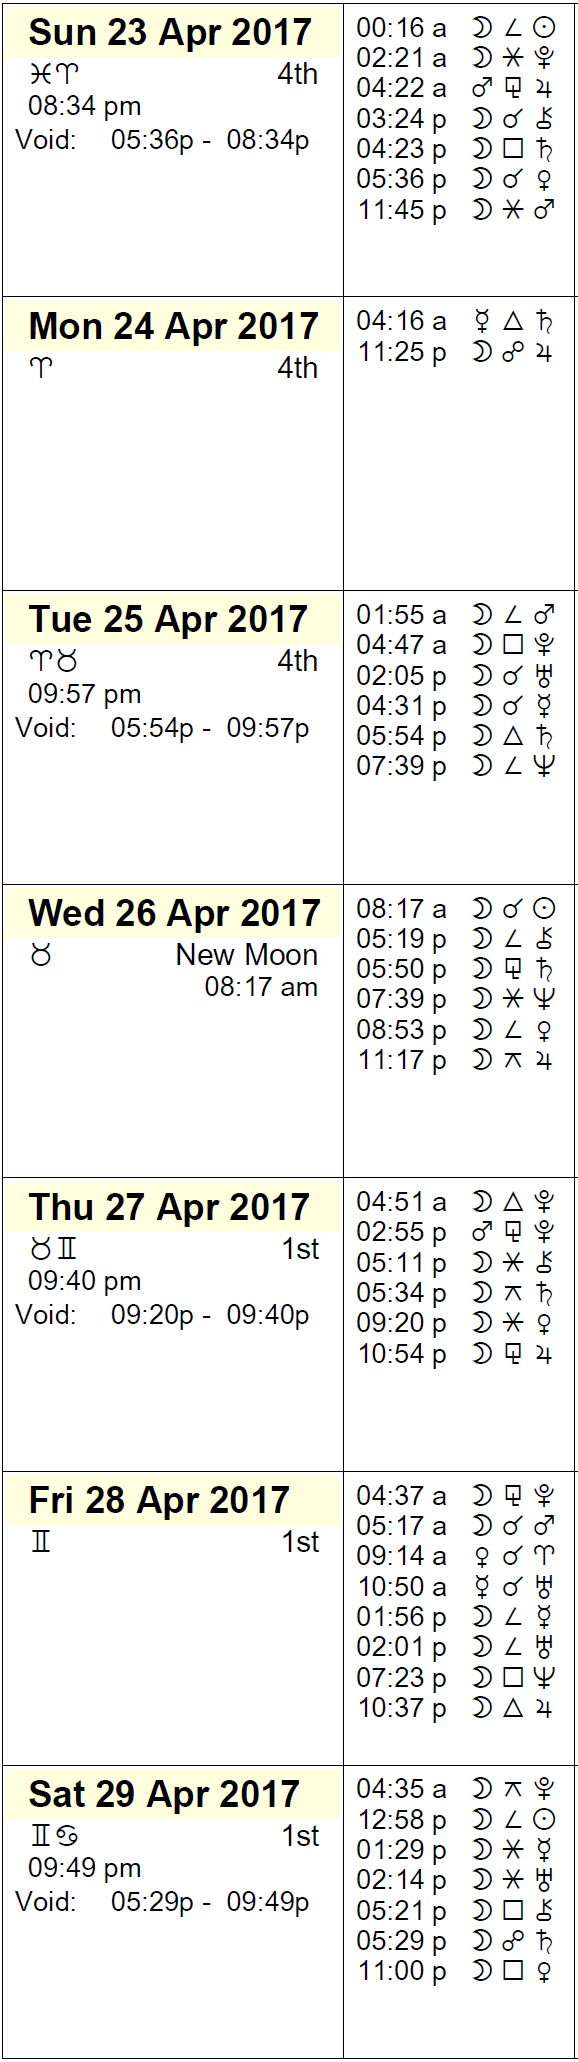 This Week in Astrology Calendar - April 23 to 29, 2017